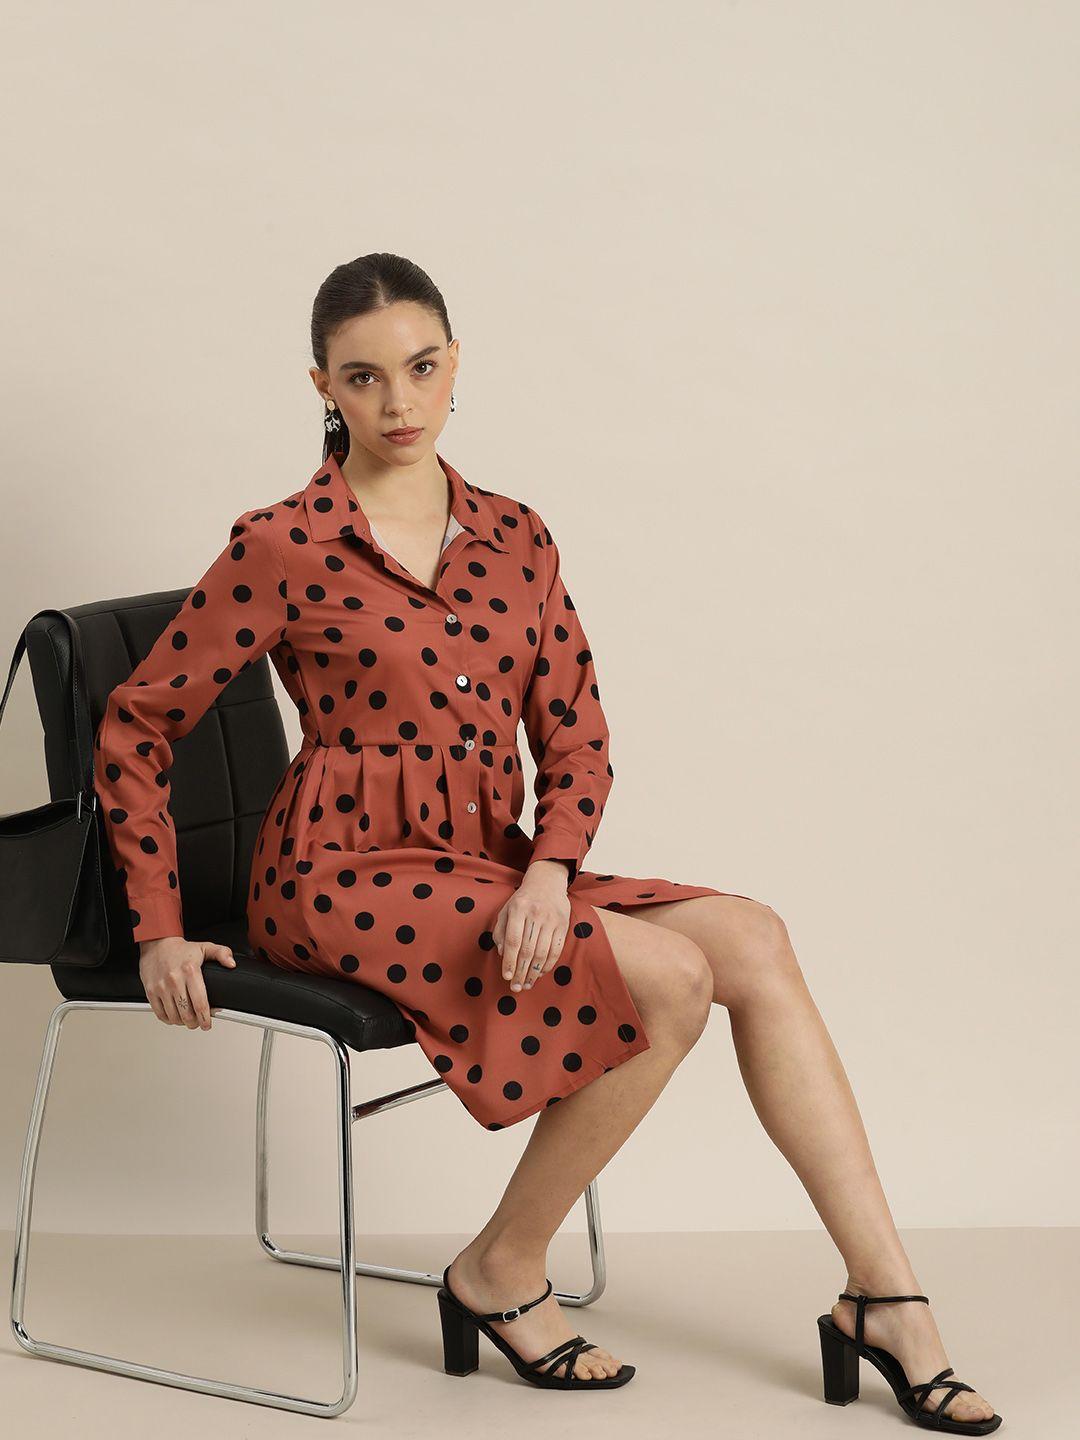 encore by invictus rust & black polka dots printed a-line dress